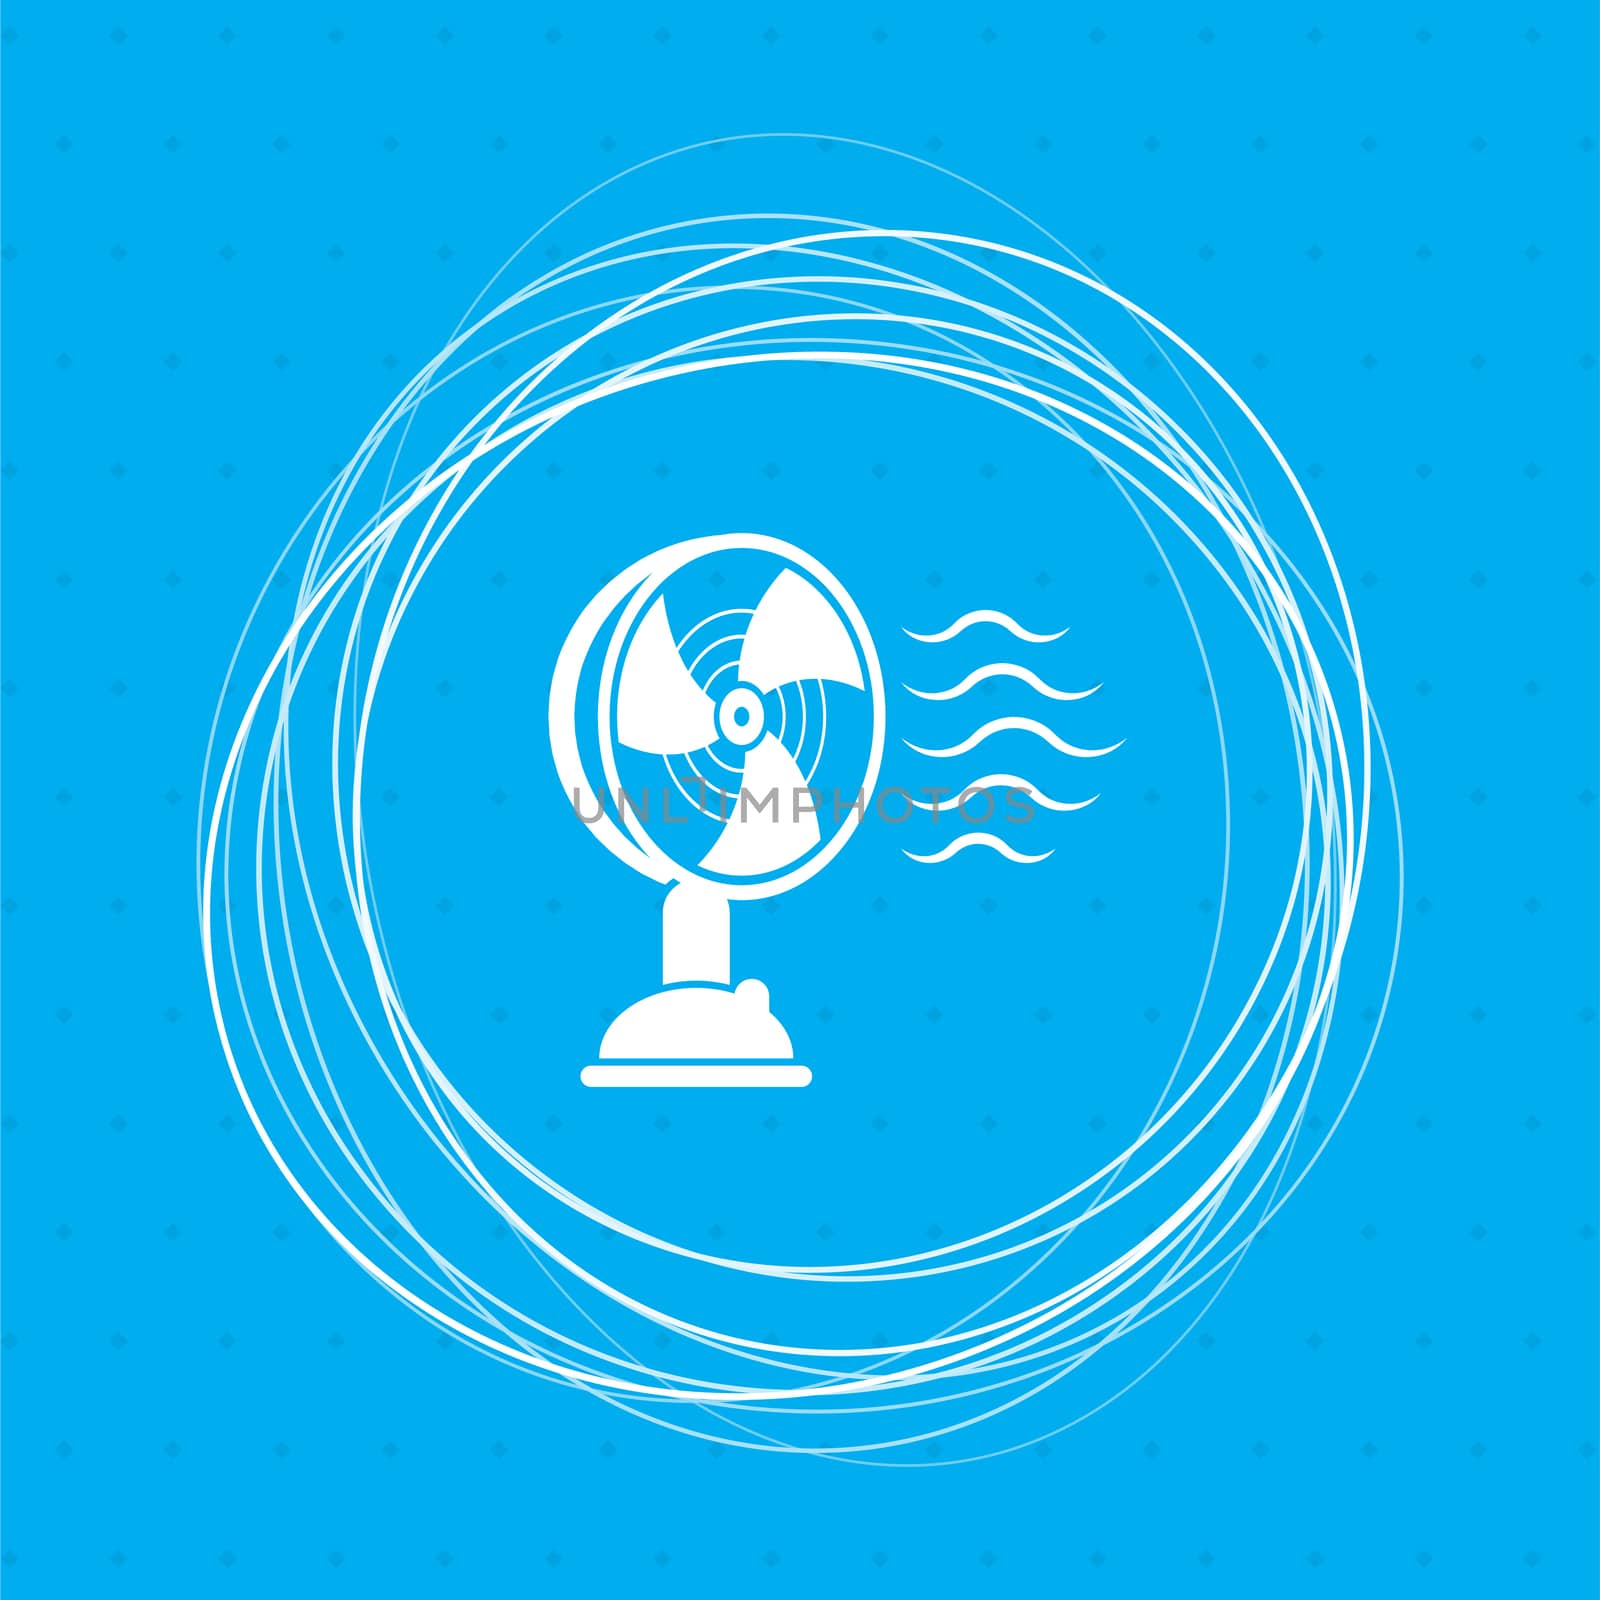 Fan icon on a blue background with abstract circles around and place for your text.  by Adamchuk